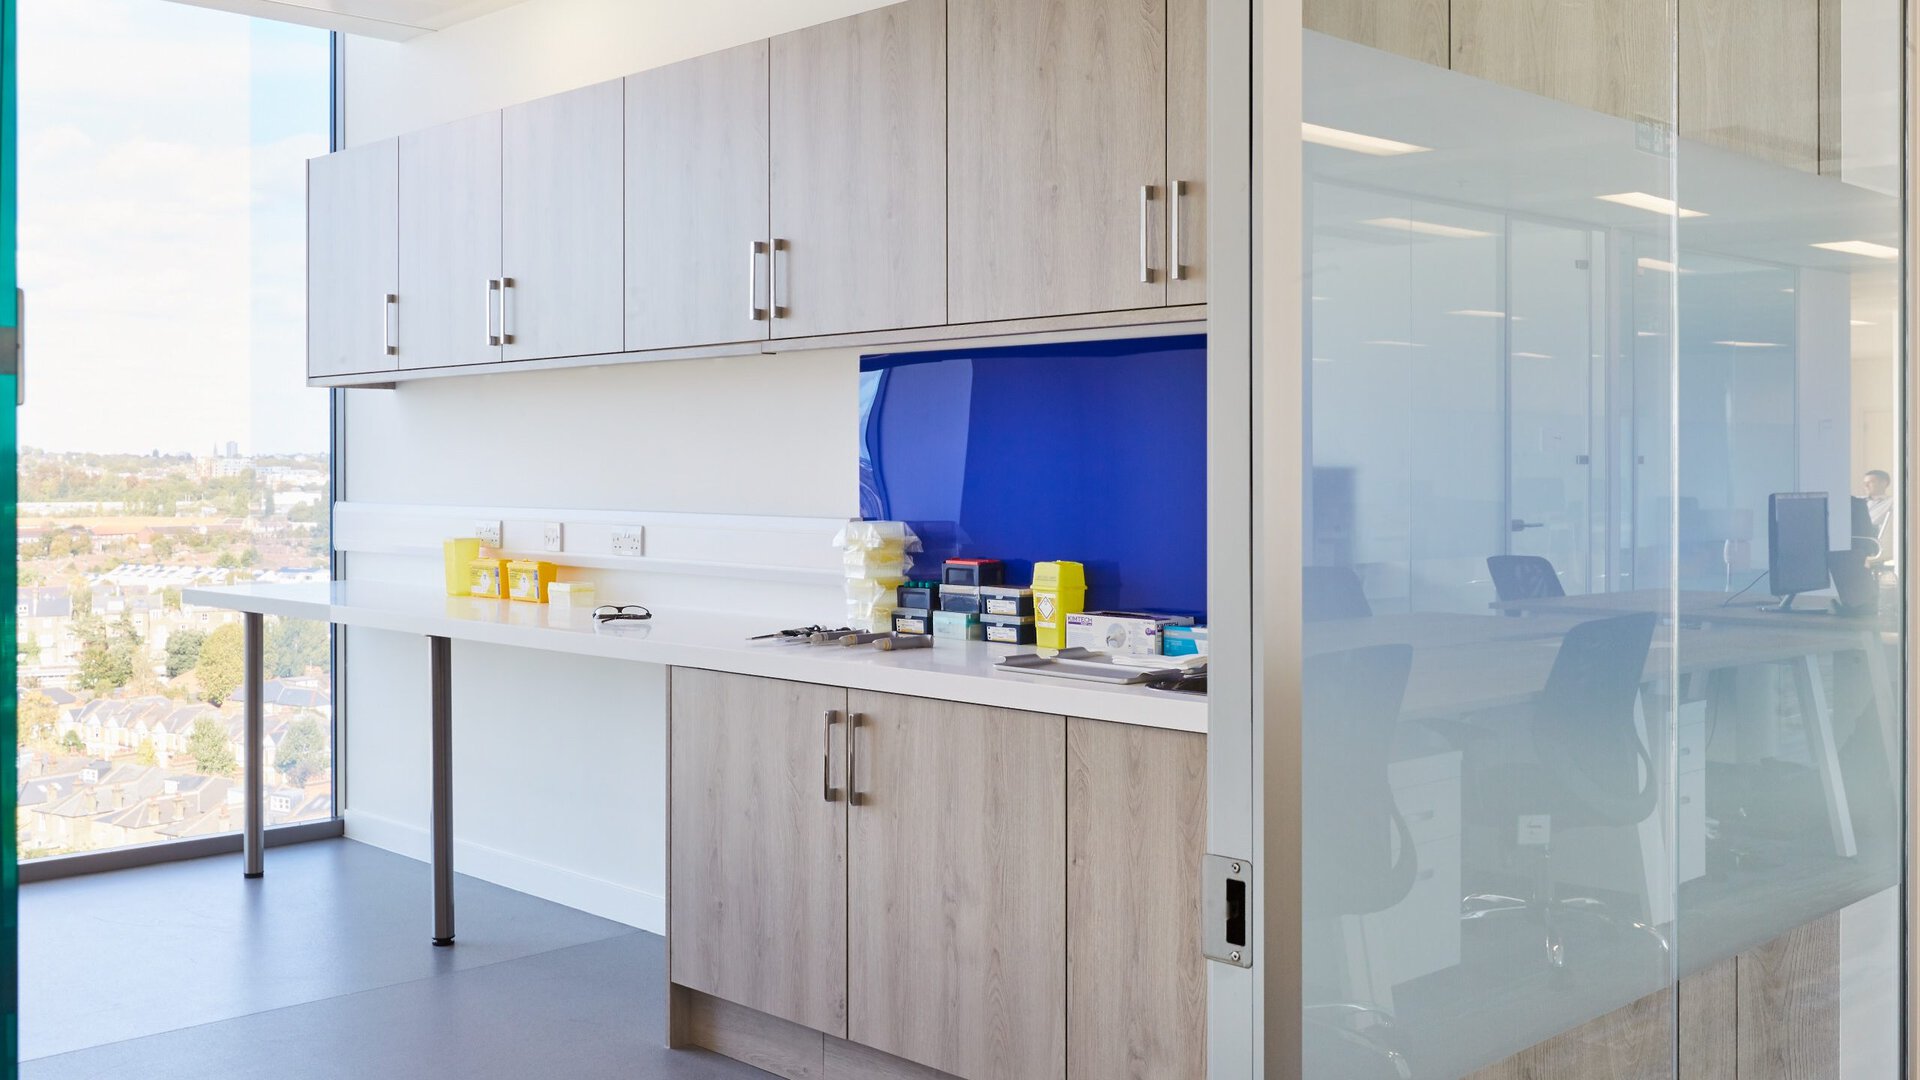 Inside a life sciences workplace design and build project by AIS